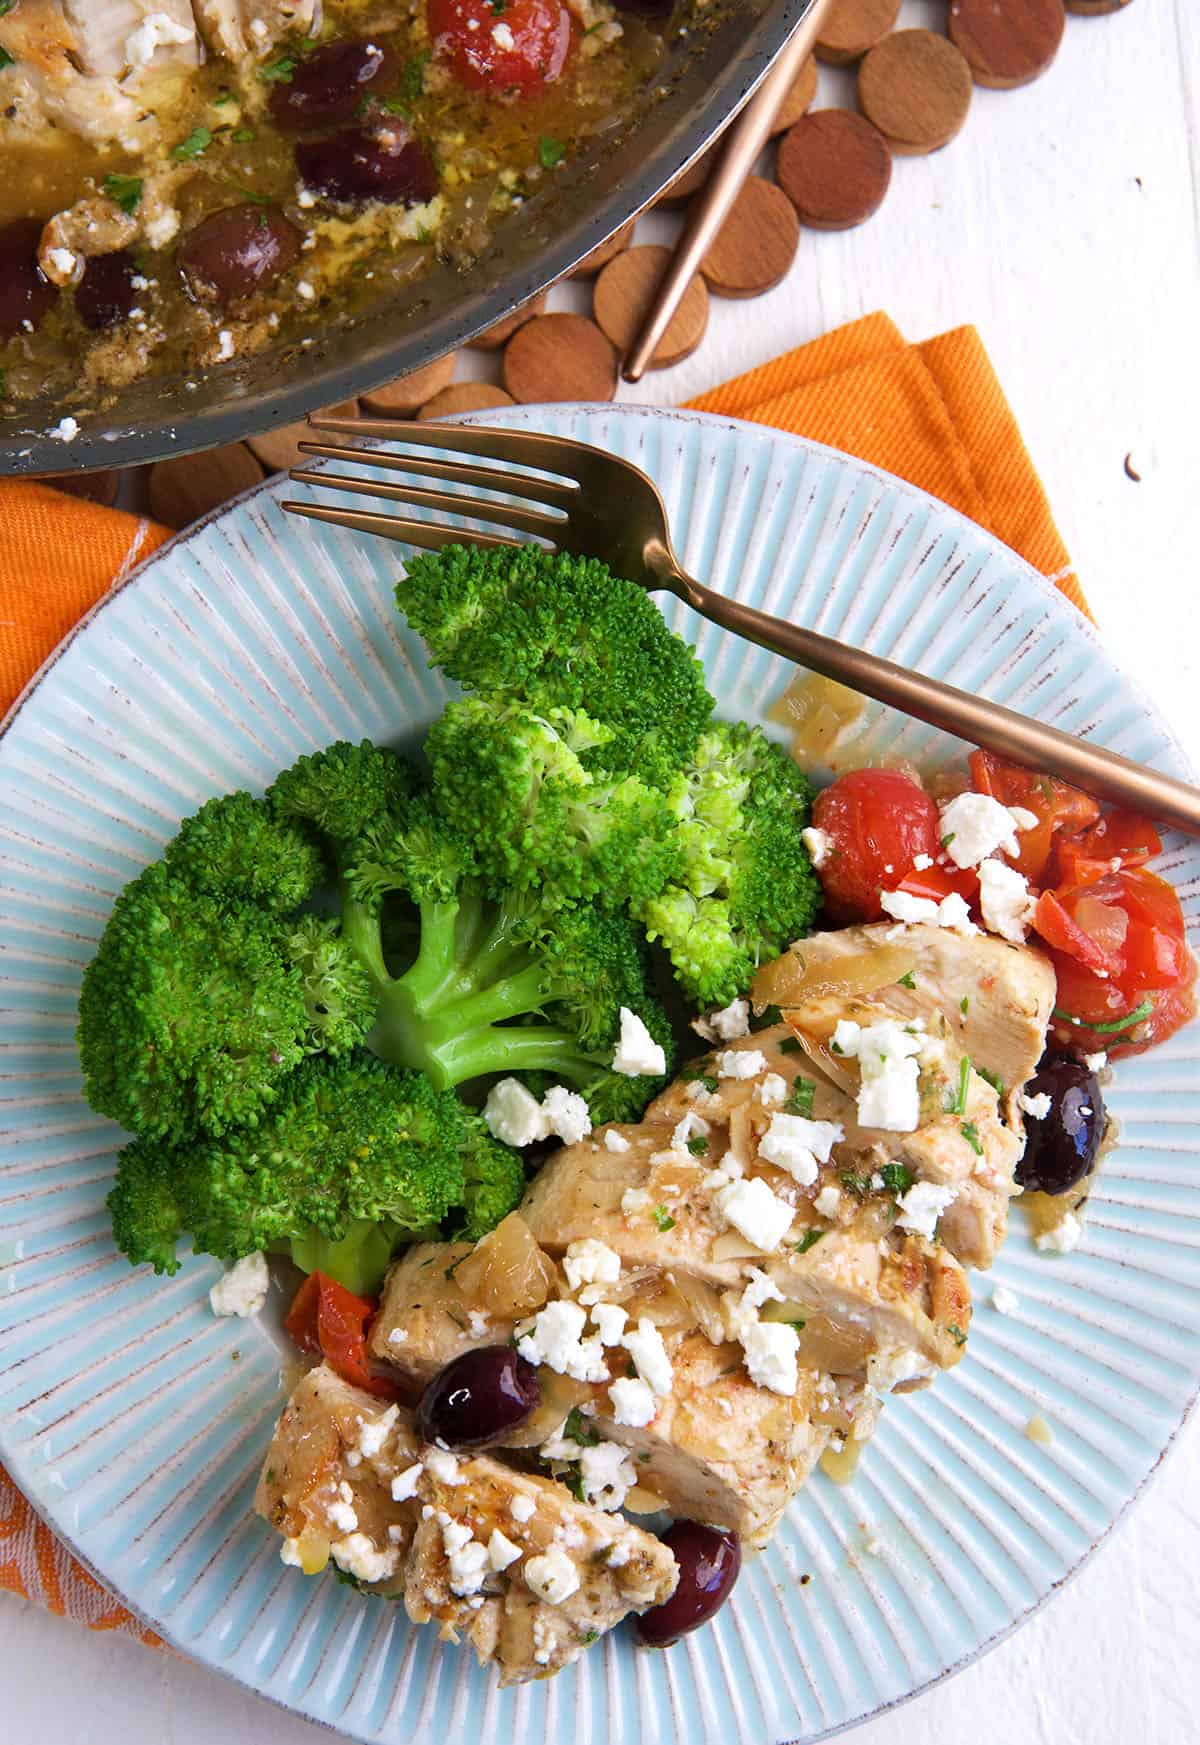 A sliced chicken breast is placed next to cooked broccoli.